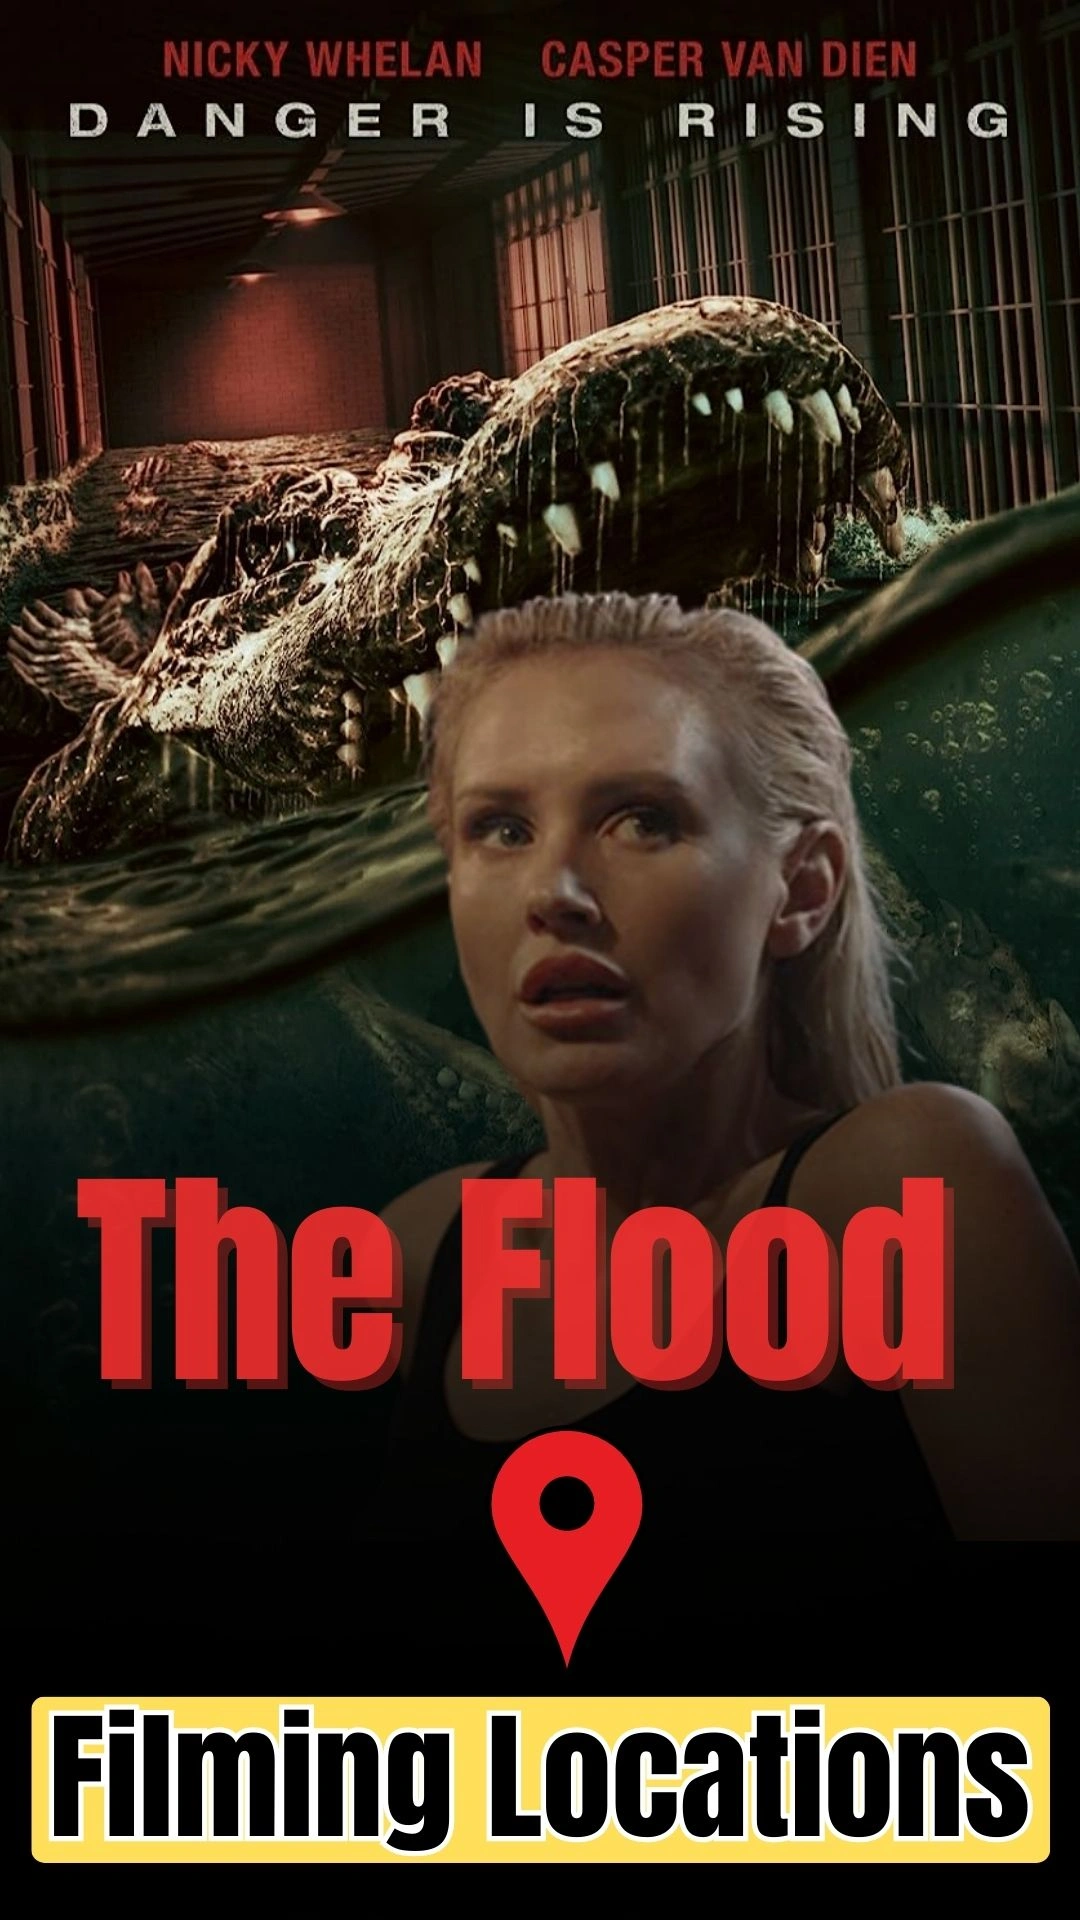 The Flood Filming Locations